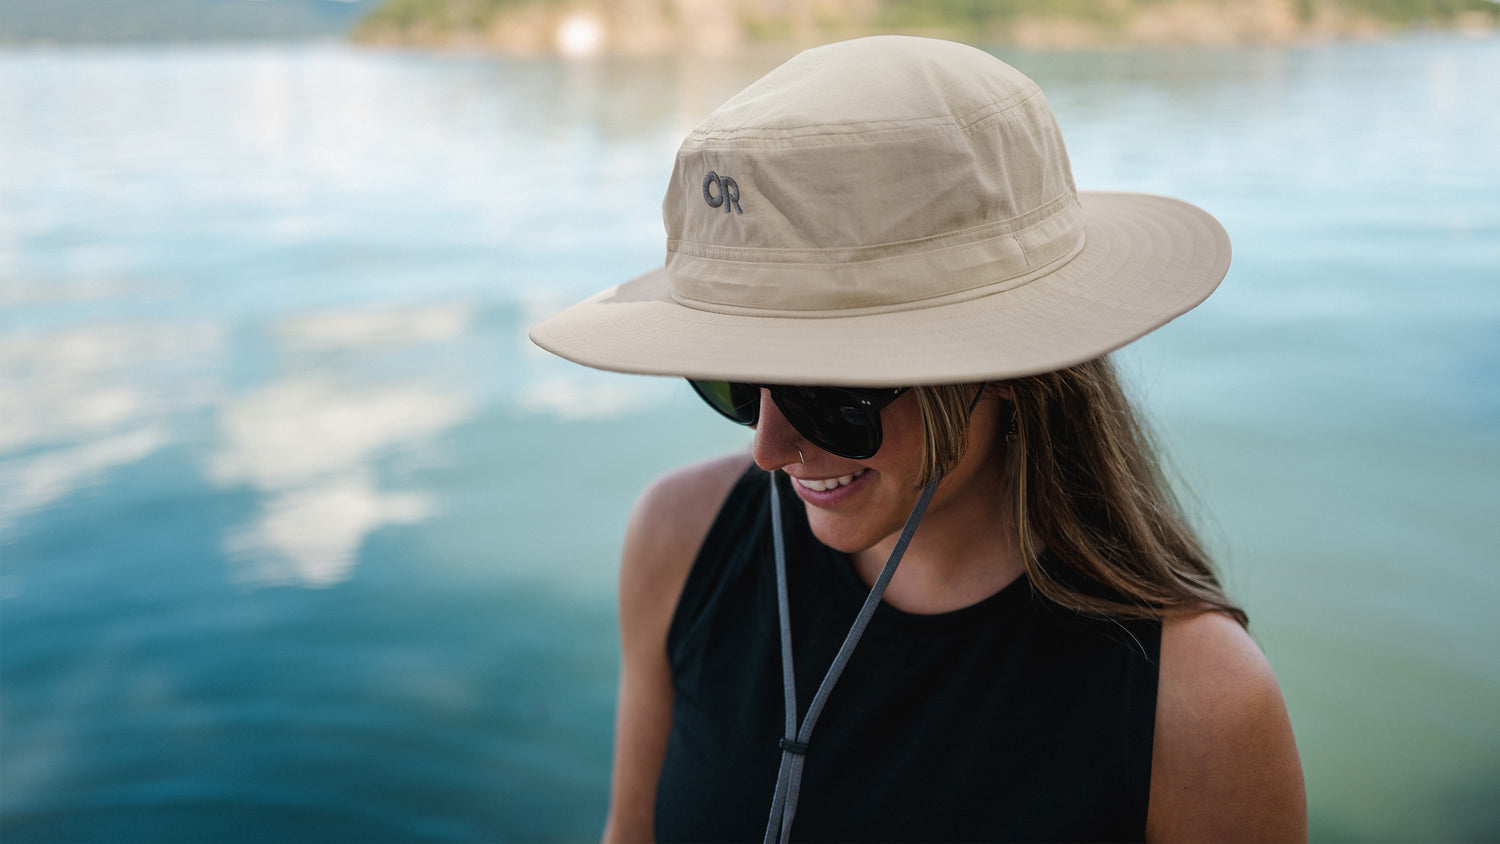 A woman smiles while wearing a sun hat and sunglasses by the water.